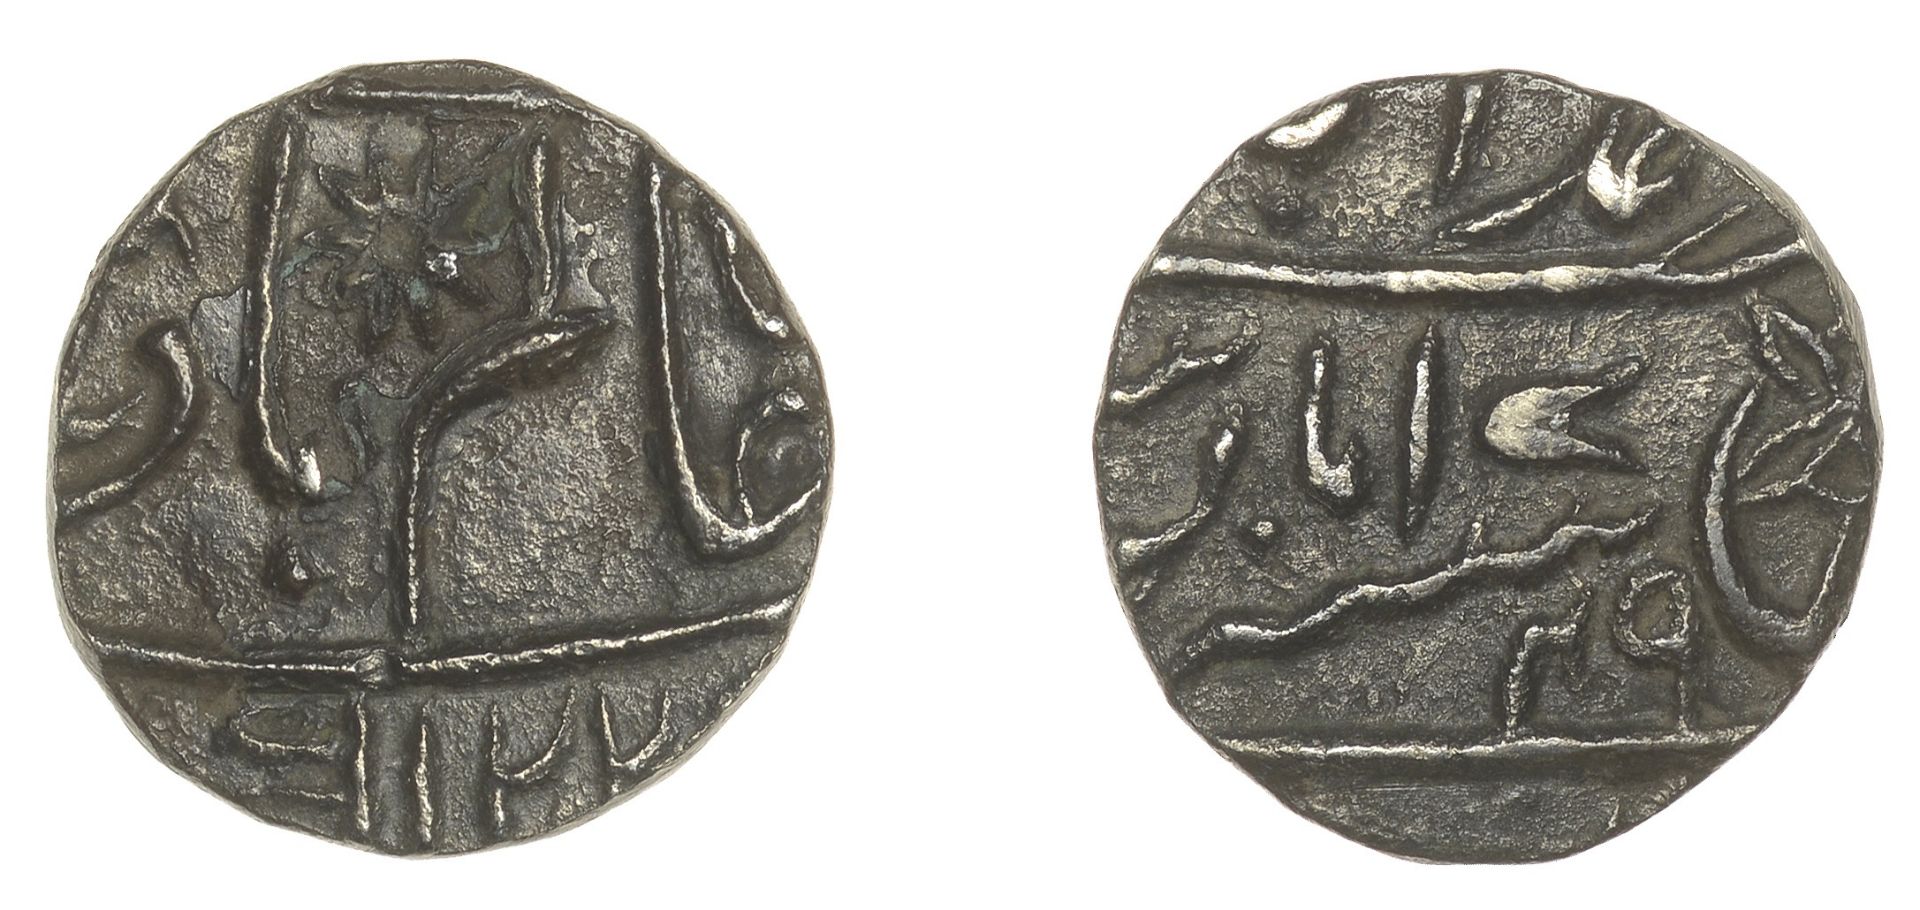 East India Company, Bengal Presidency, Benares Mint: Third phase, silver Quarter-Rupee in th...